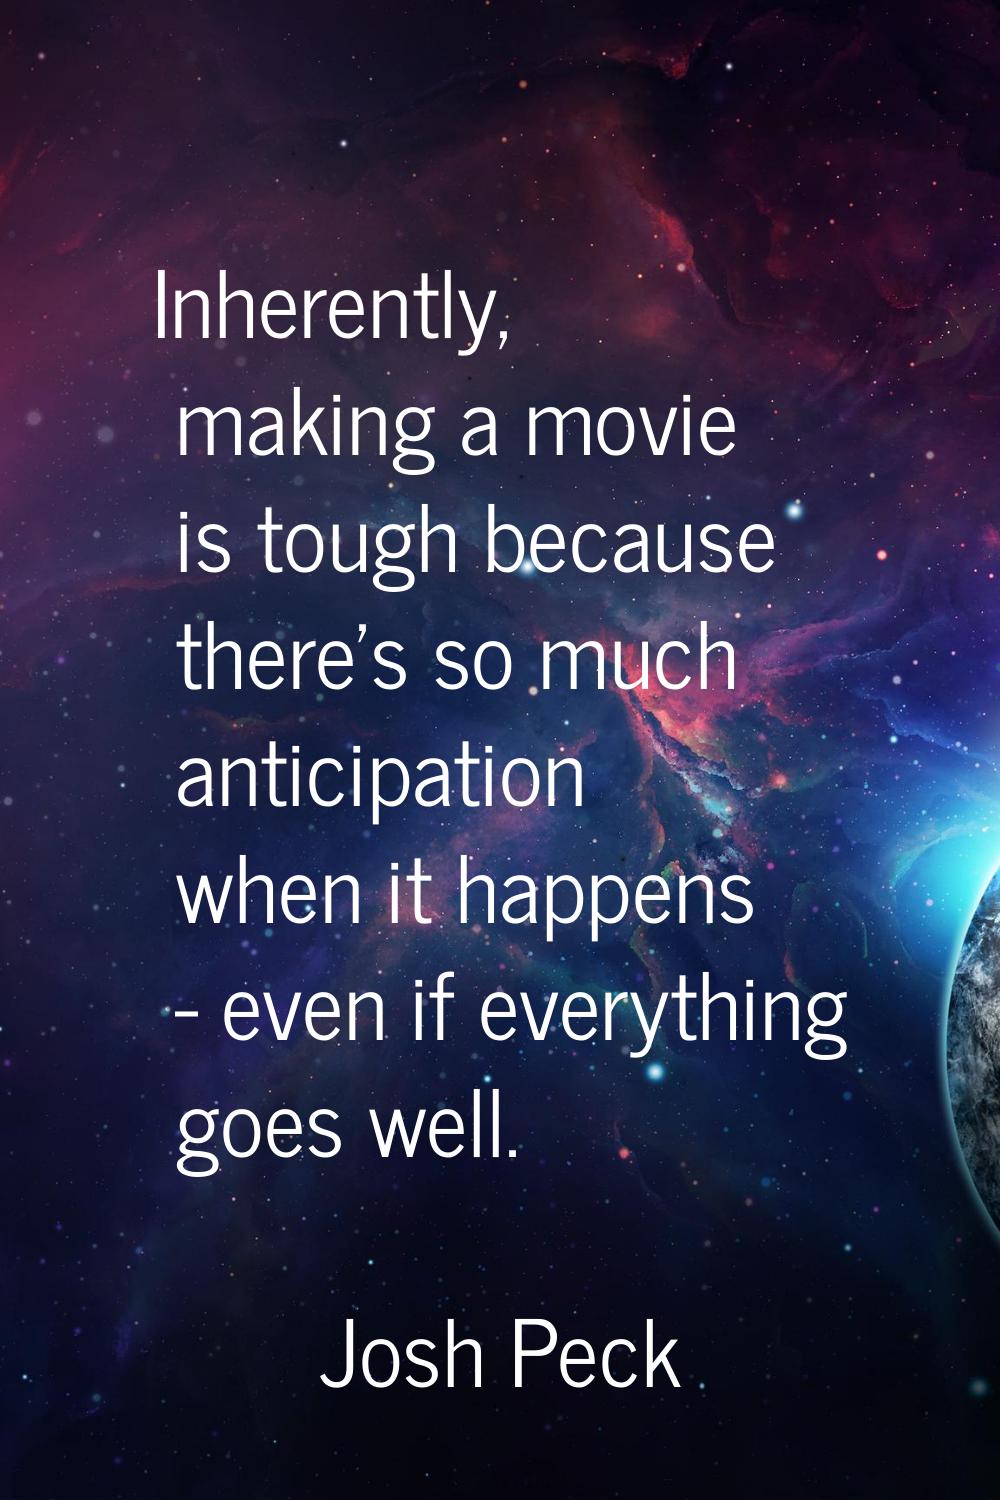 Inherently, making a movie is tough because there's so much anticipation when it happens - even if 